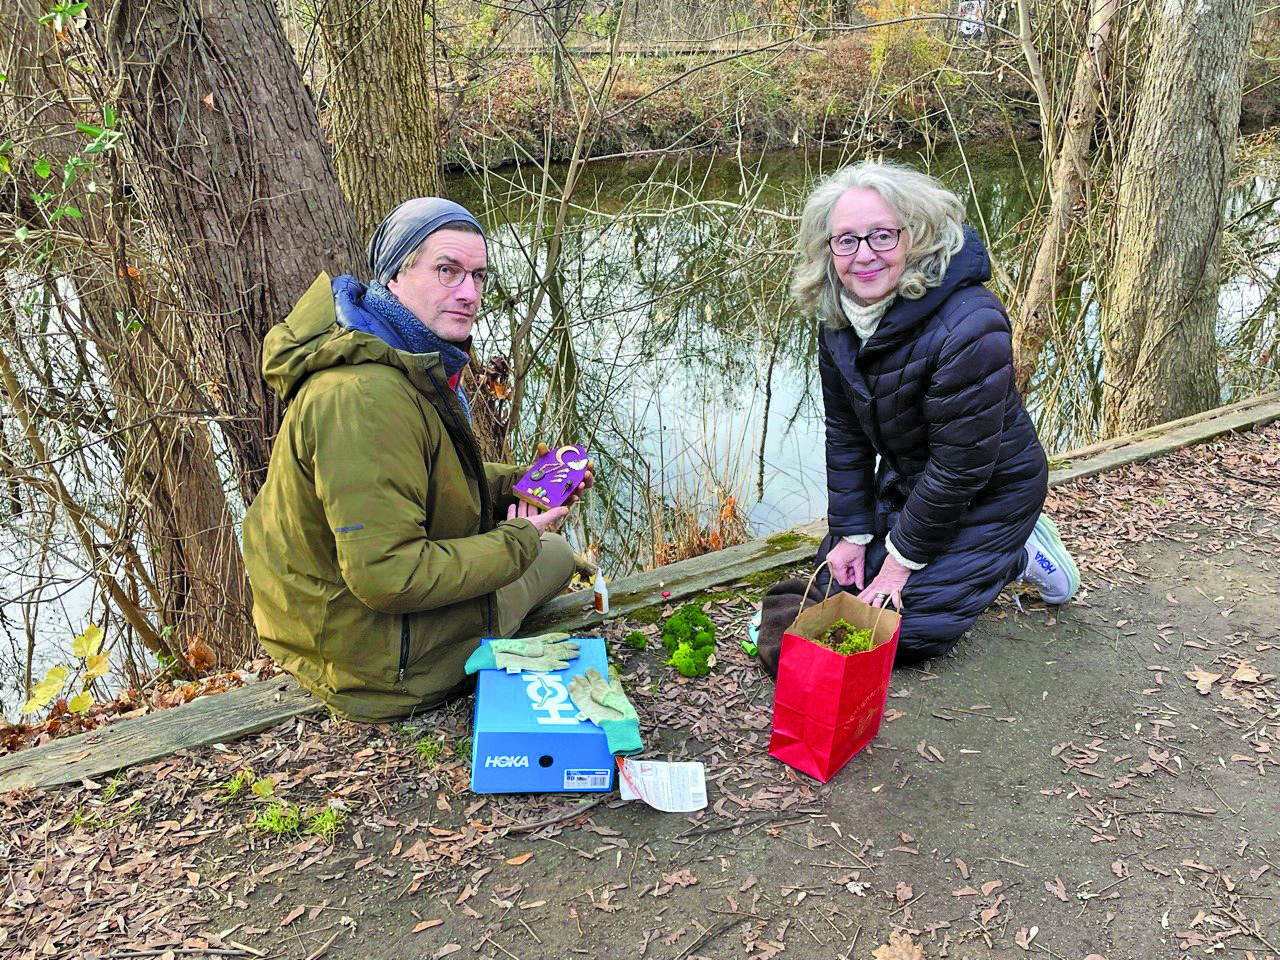 Ian and Moe Phillips have installed “fairy doors” on trees along the Delaware and Raritan Canal towpath in Lambertville, N.J.